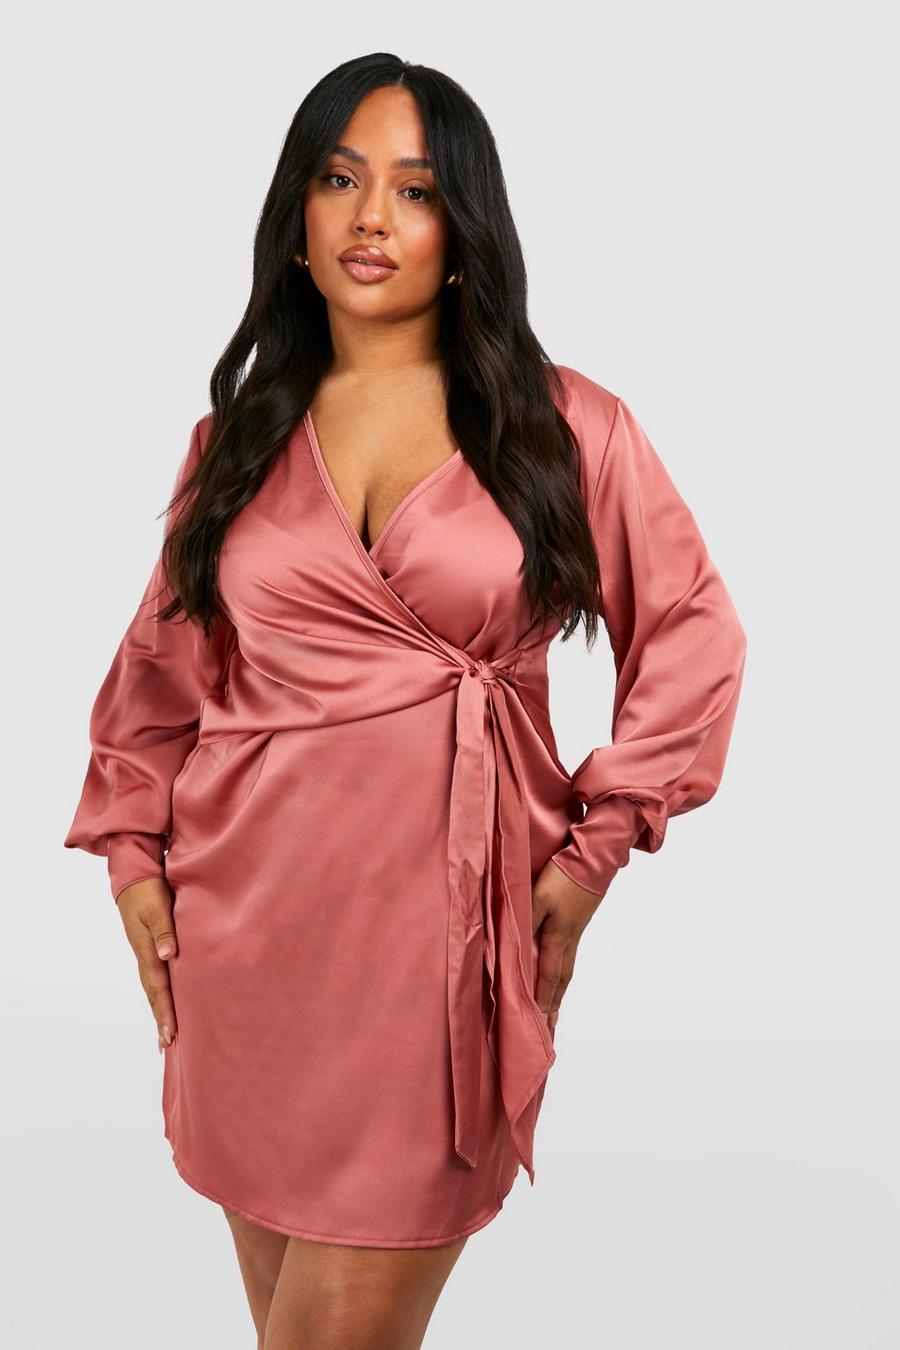 Plus Size Going Out Outfits, Plus Size Party Wear